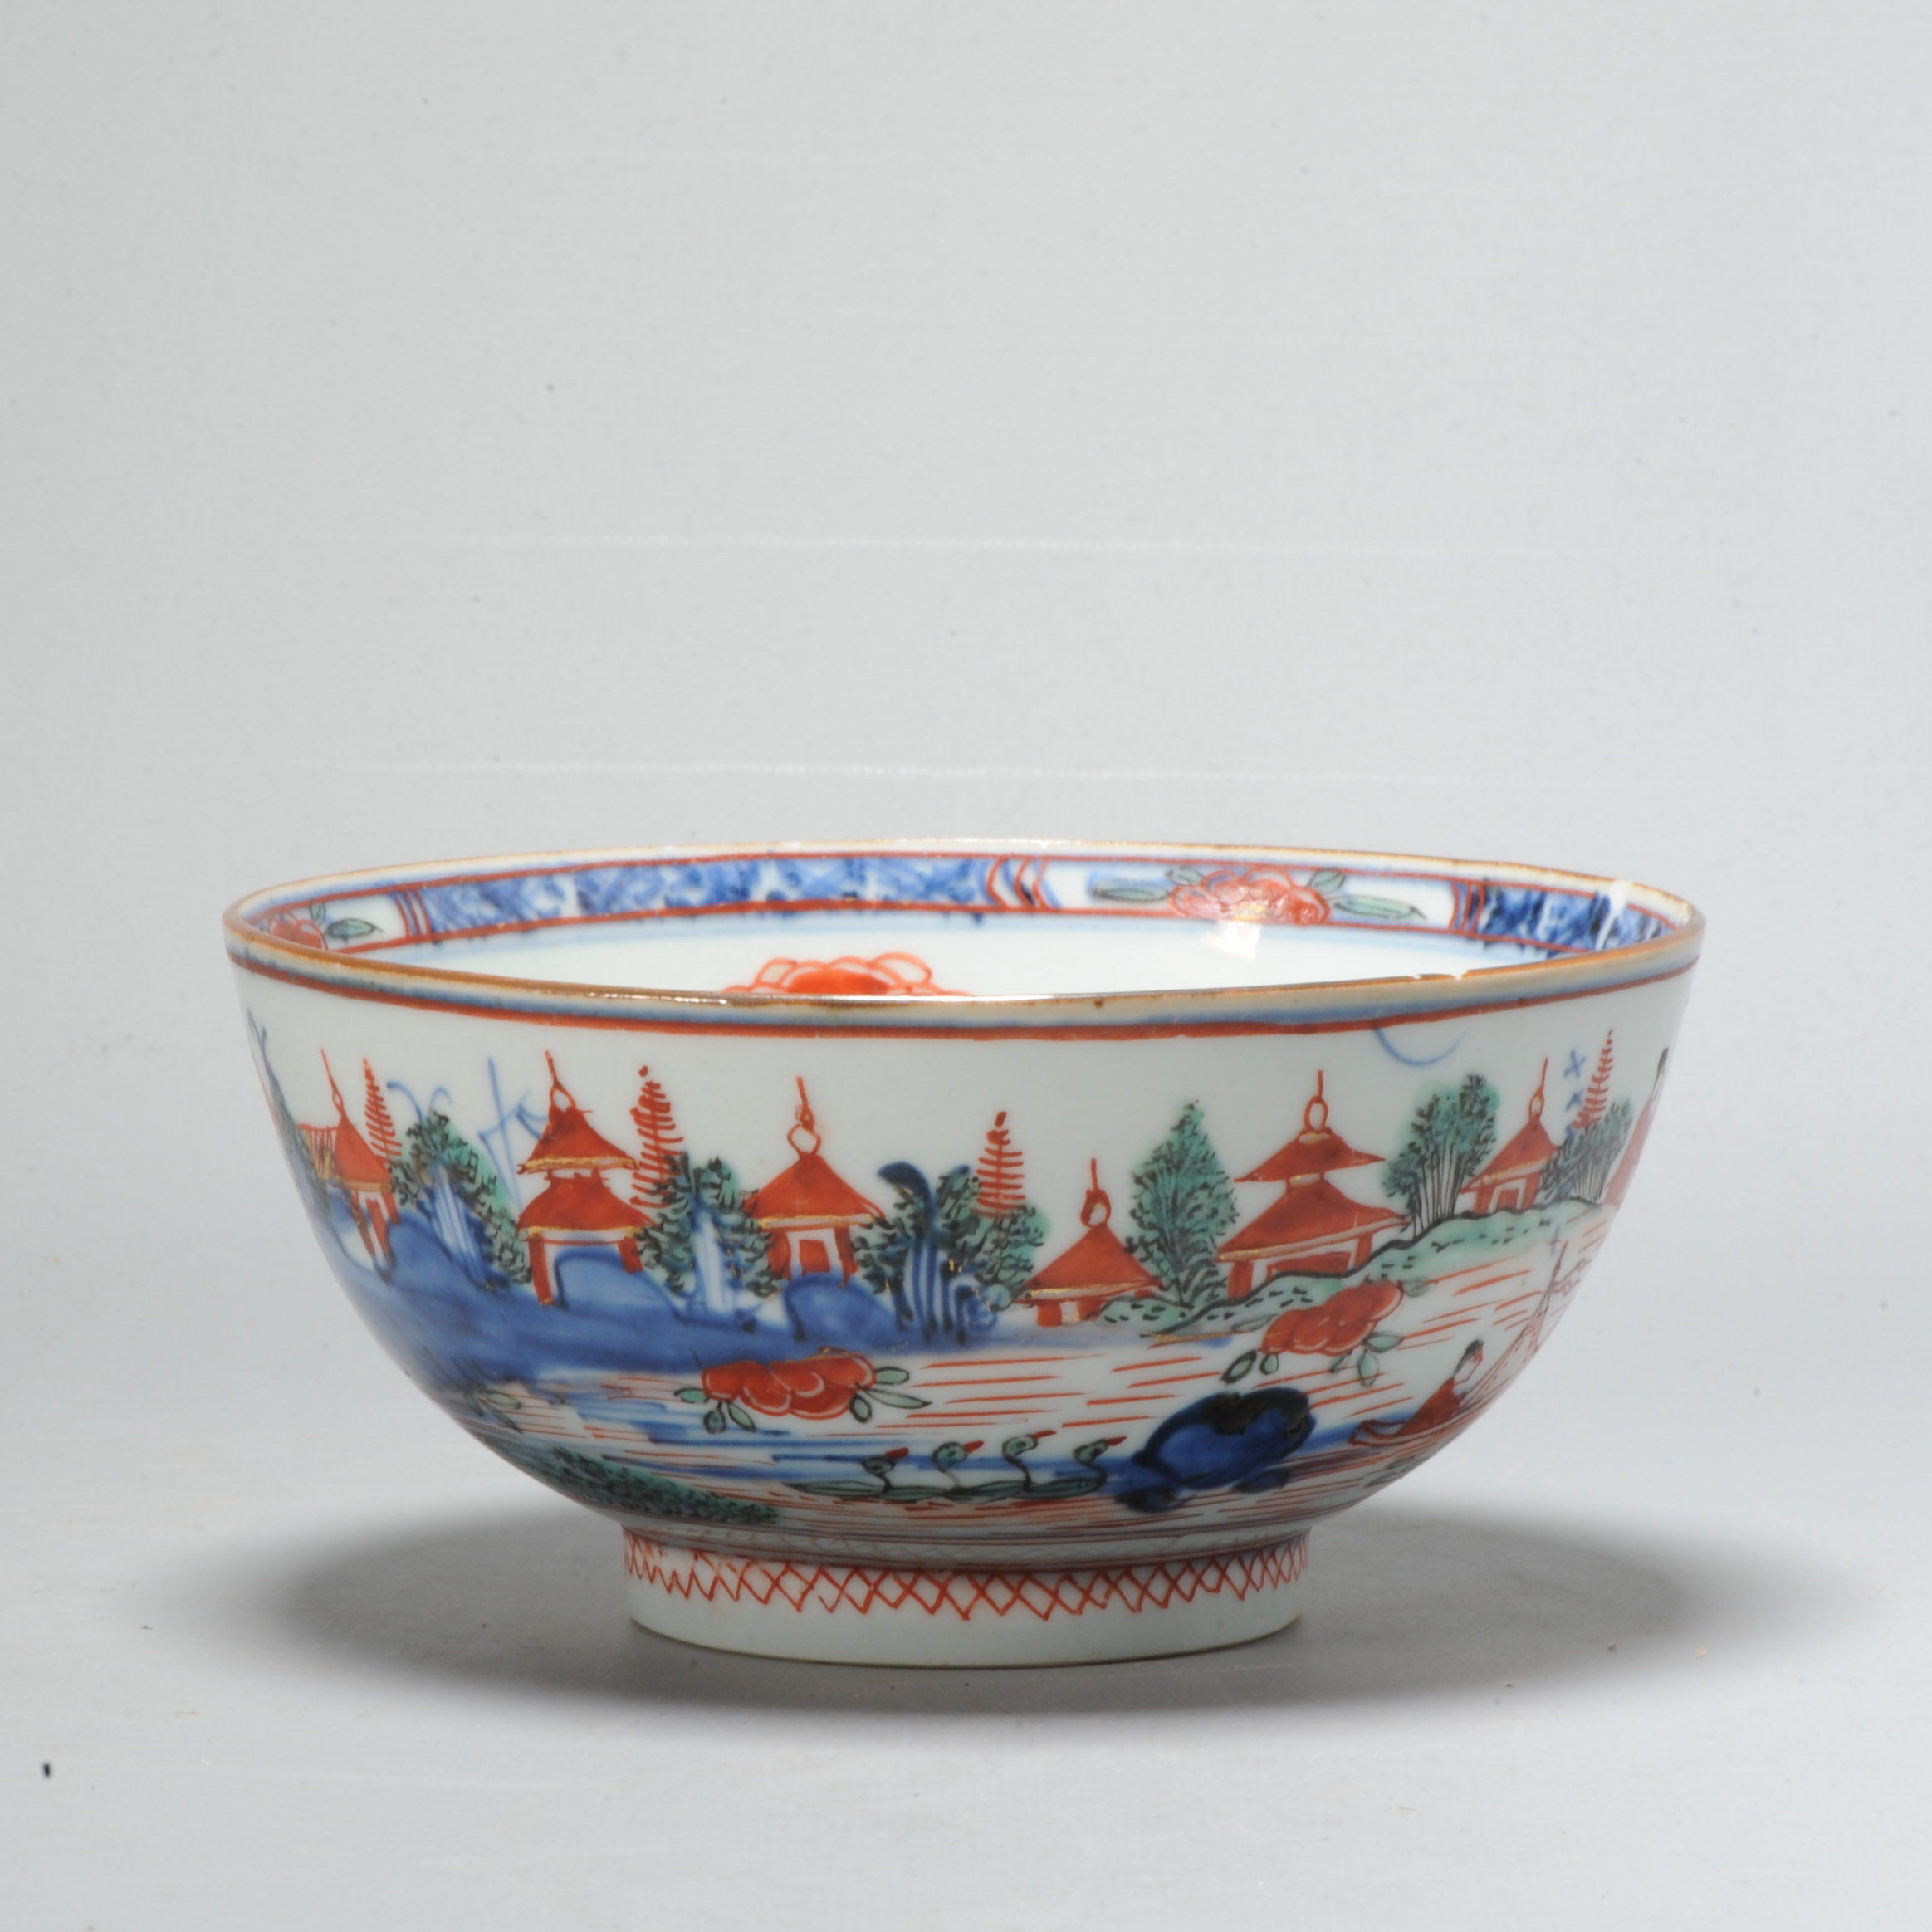 1060 Antique Chinese Porcelain bowl blue and white Landscape Decorated in Europe. Amsterdam Bont